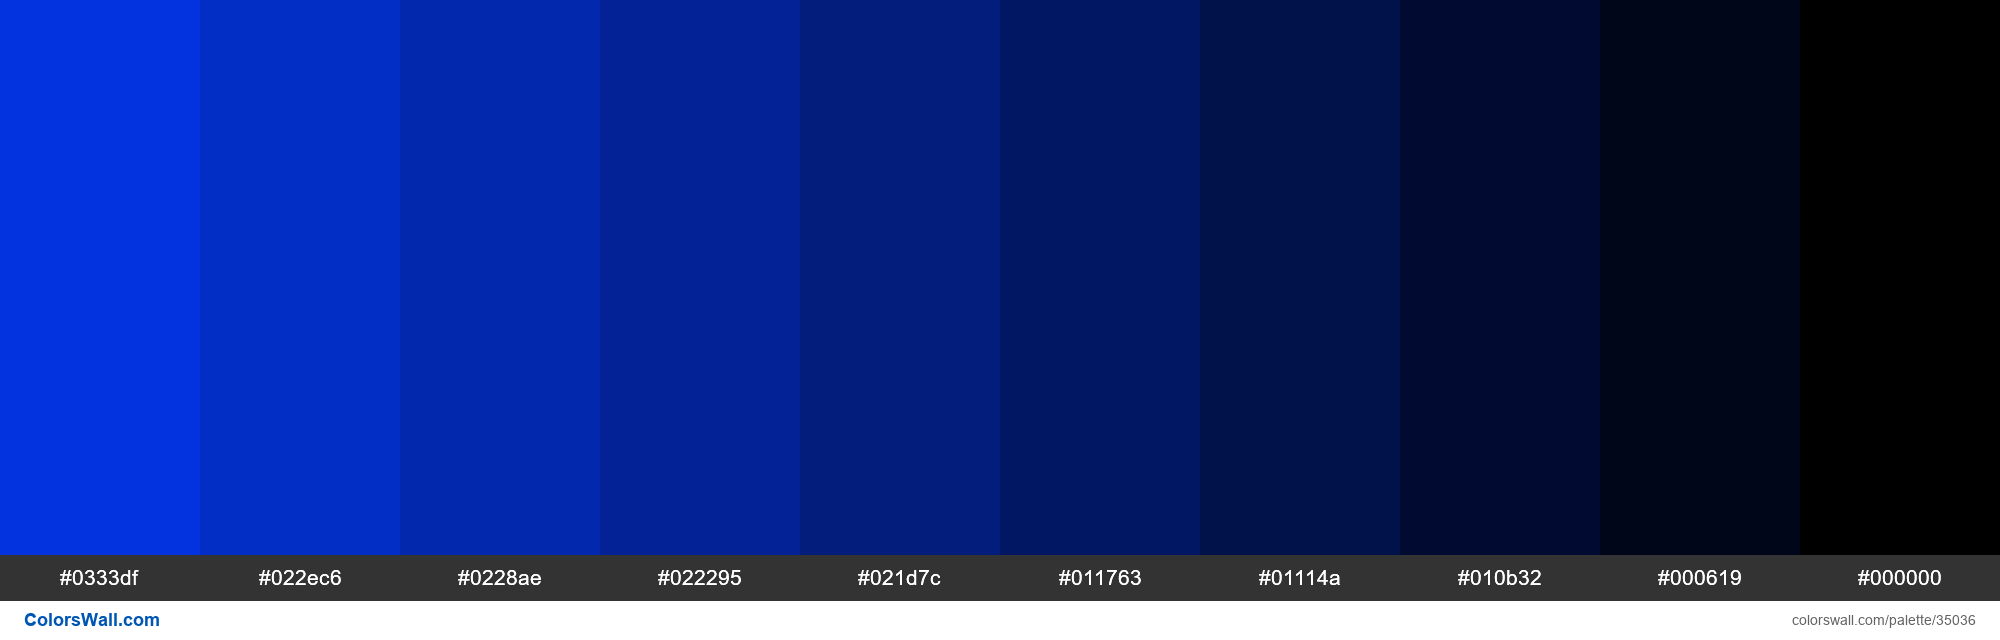 colorswall on X: Shades of Pacific Blue color #009DC4 hex #009dc4